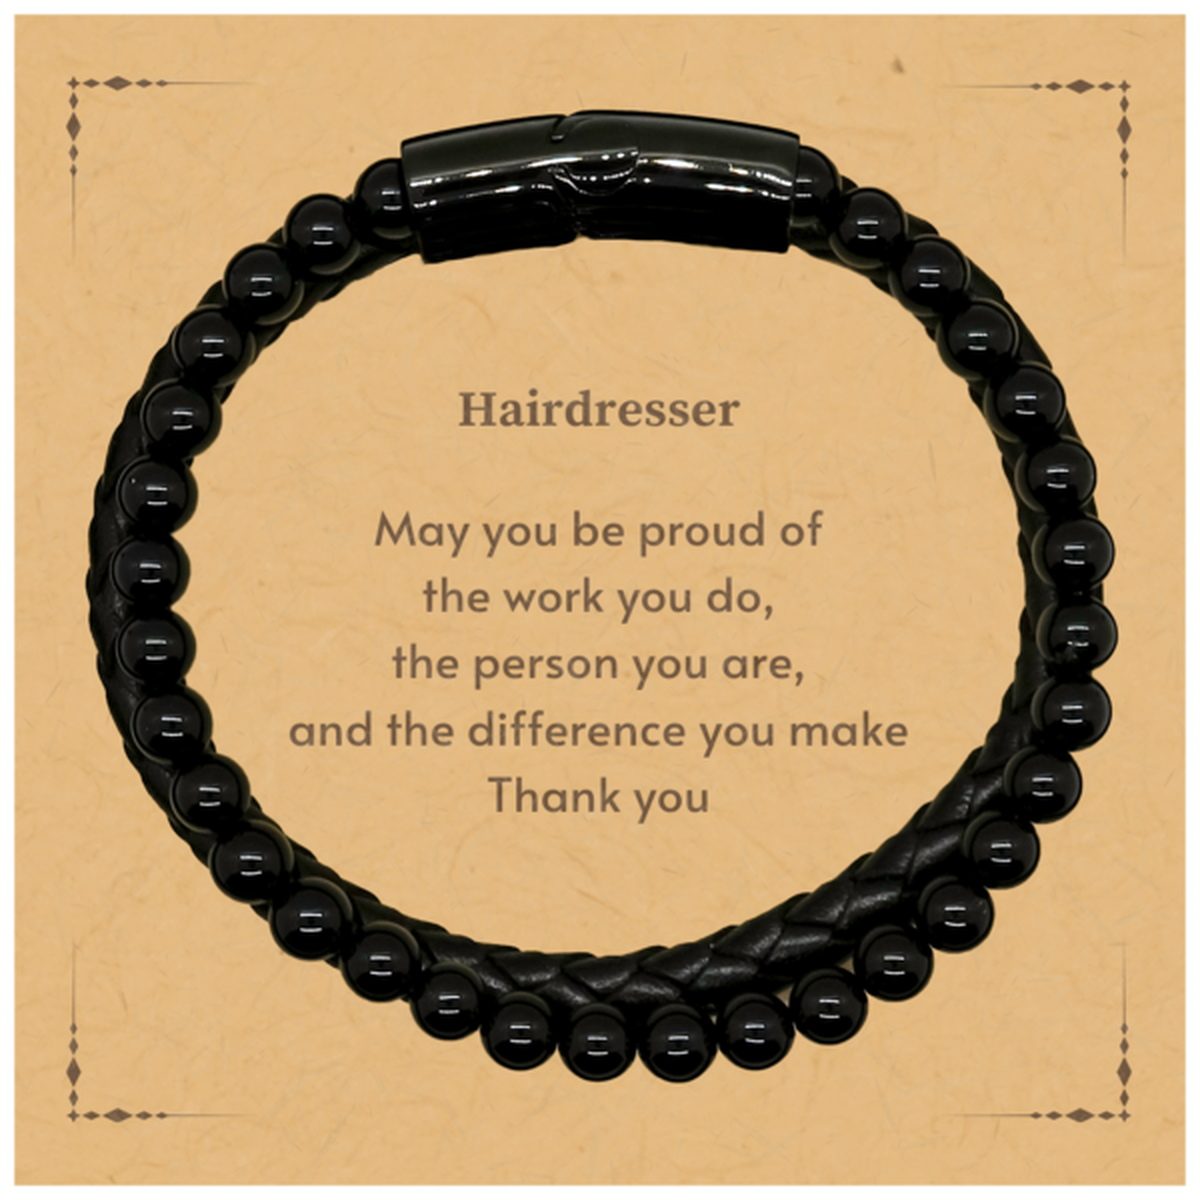 Heartwarming Stone Leather Bracelets Retirement Coworkers Gifts for Hairdresser, Hairdresser May You be proud of the work you do, the person you are Gifts for Boss Men Women Friends